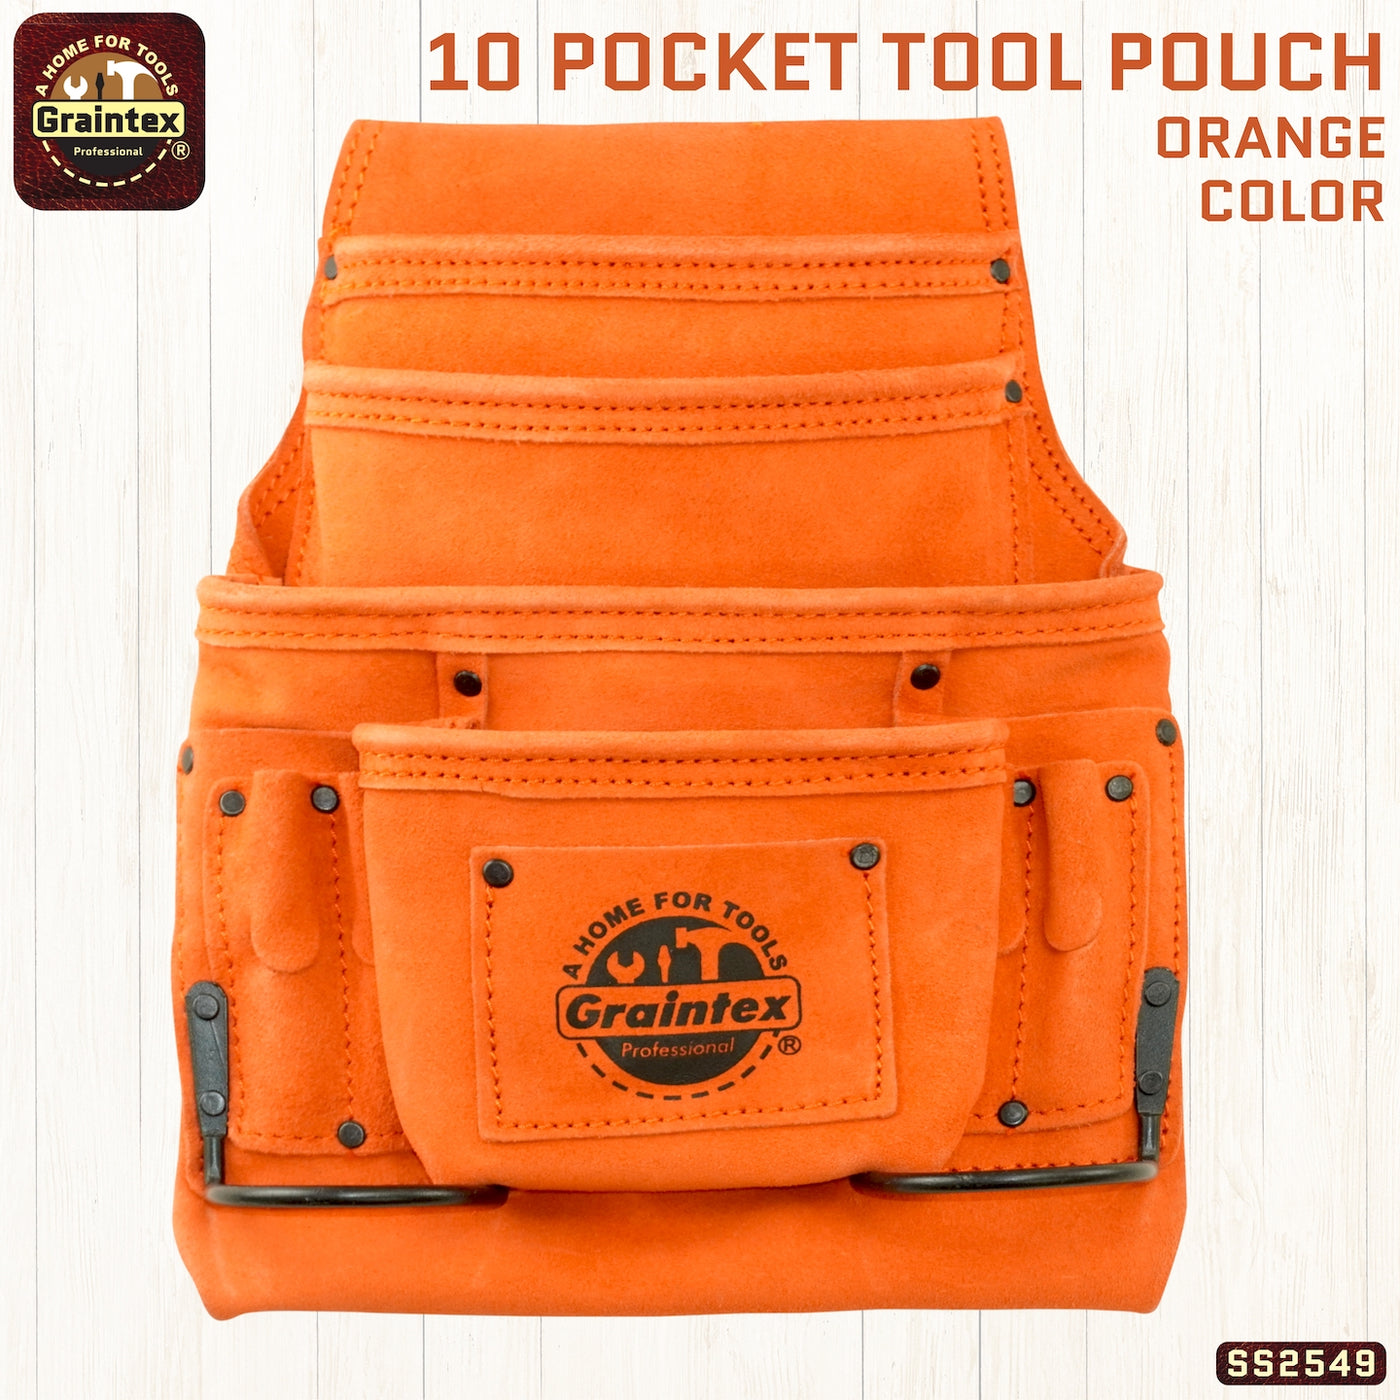 SS2549 :: 10 Pocket Nail & Tool Pouch Orange Color Suede Leather